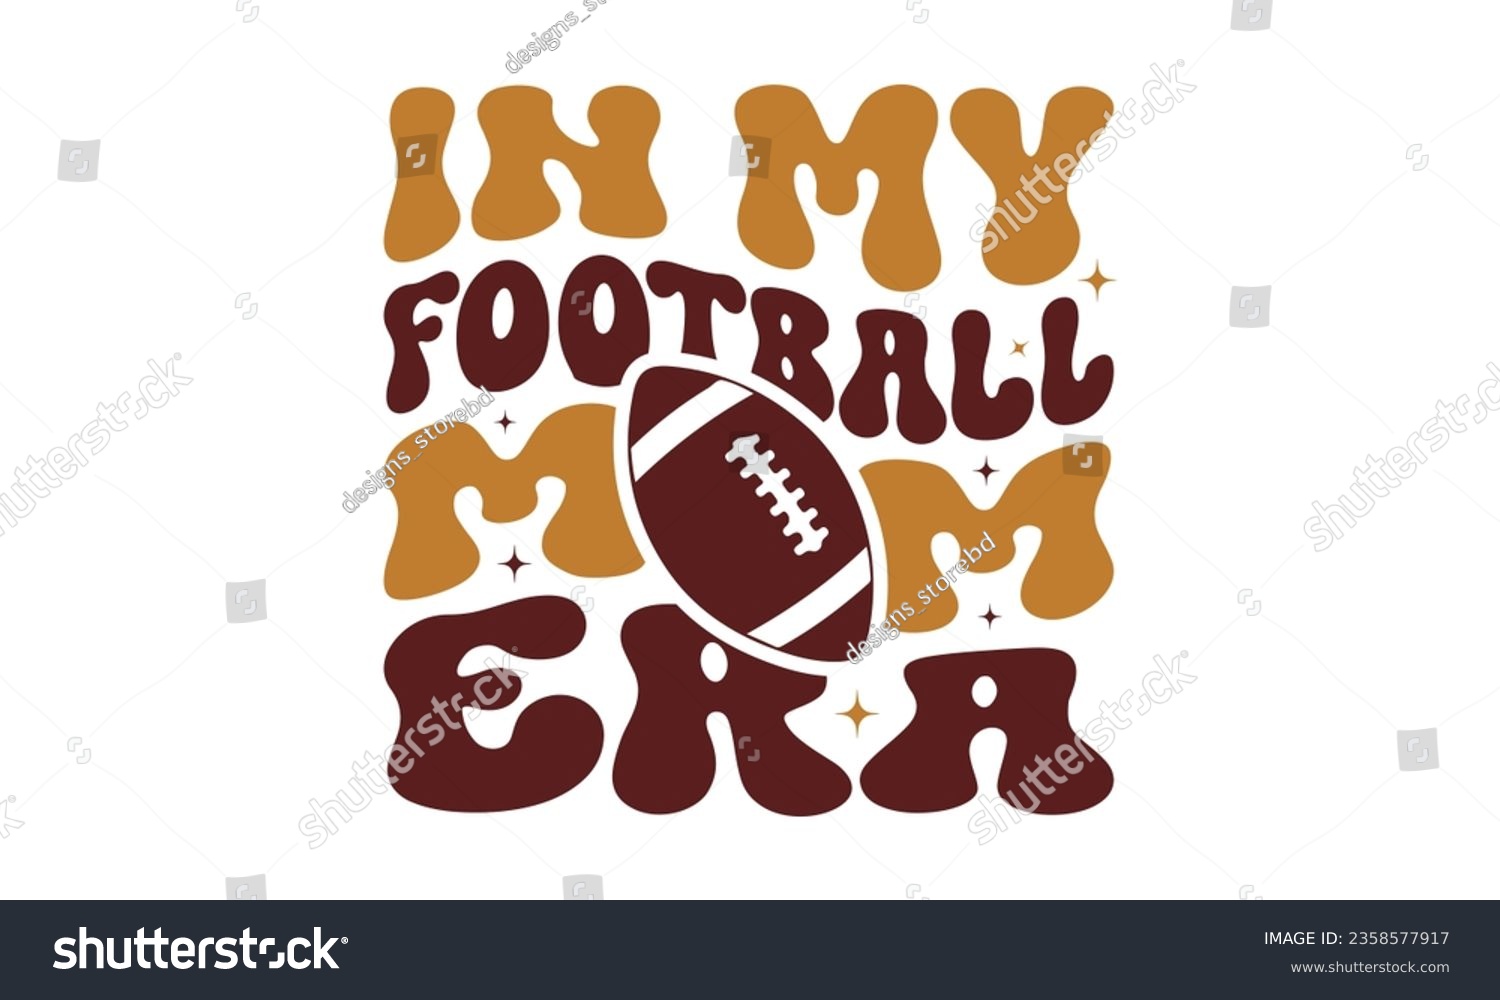 SVG of In my football mom era svg, Football SVG, Football T-shirt Design Template SVG Cut File Typography, Files for Cutting Cricut and Silhouette Cut svg File, Game Day eps, png svg